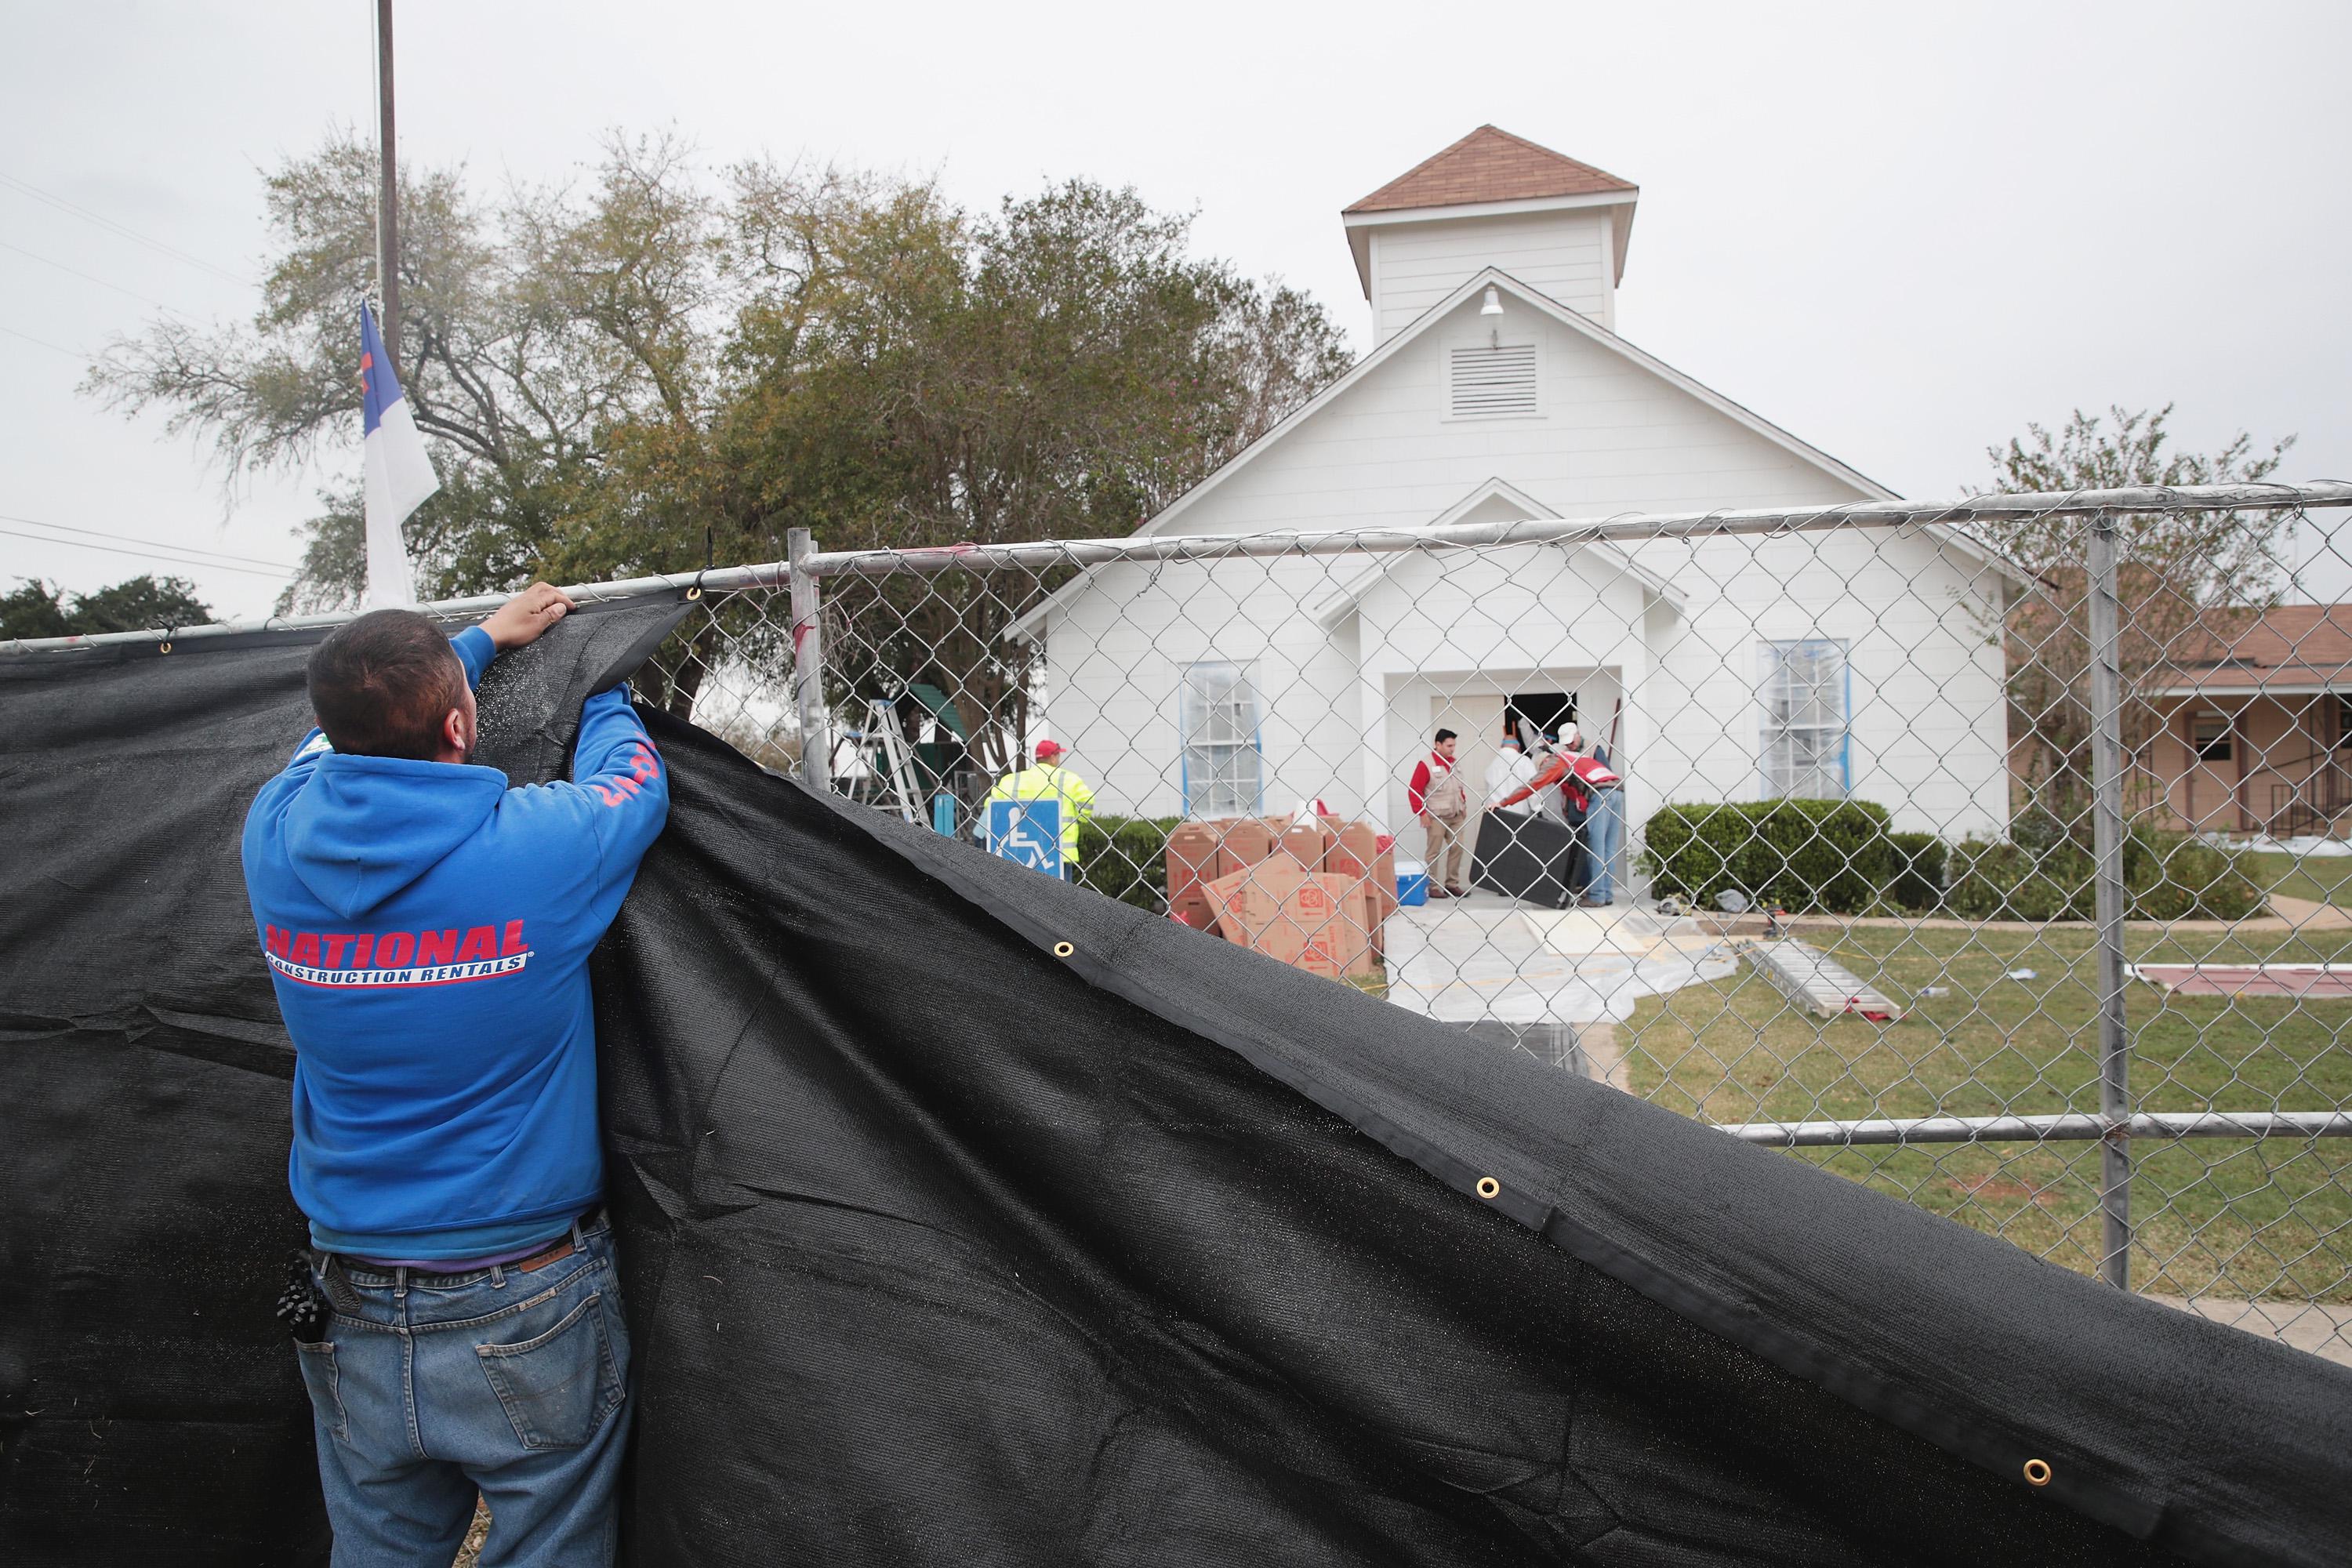 SUTHERLAND SPRINGS, TX - NOVEMBER 09:  A tarp is wrapped around the First Baptist Church of Sutherland Springs as law enforcement officials wrap up their investigation into the shooting on November 9, 2017 in Sutherland Springs, Texas. On November 5th a gunman, Devin Patrick Kelley, opened fire during the Sunday service at the church, killing the 26 people and wounded 20 others.  (Photo by Scott Olson/Getty Images)